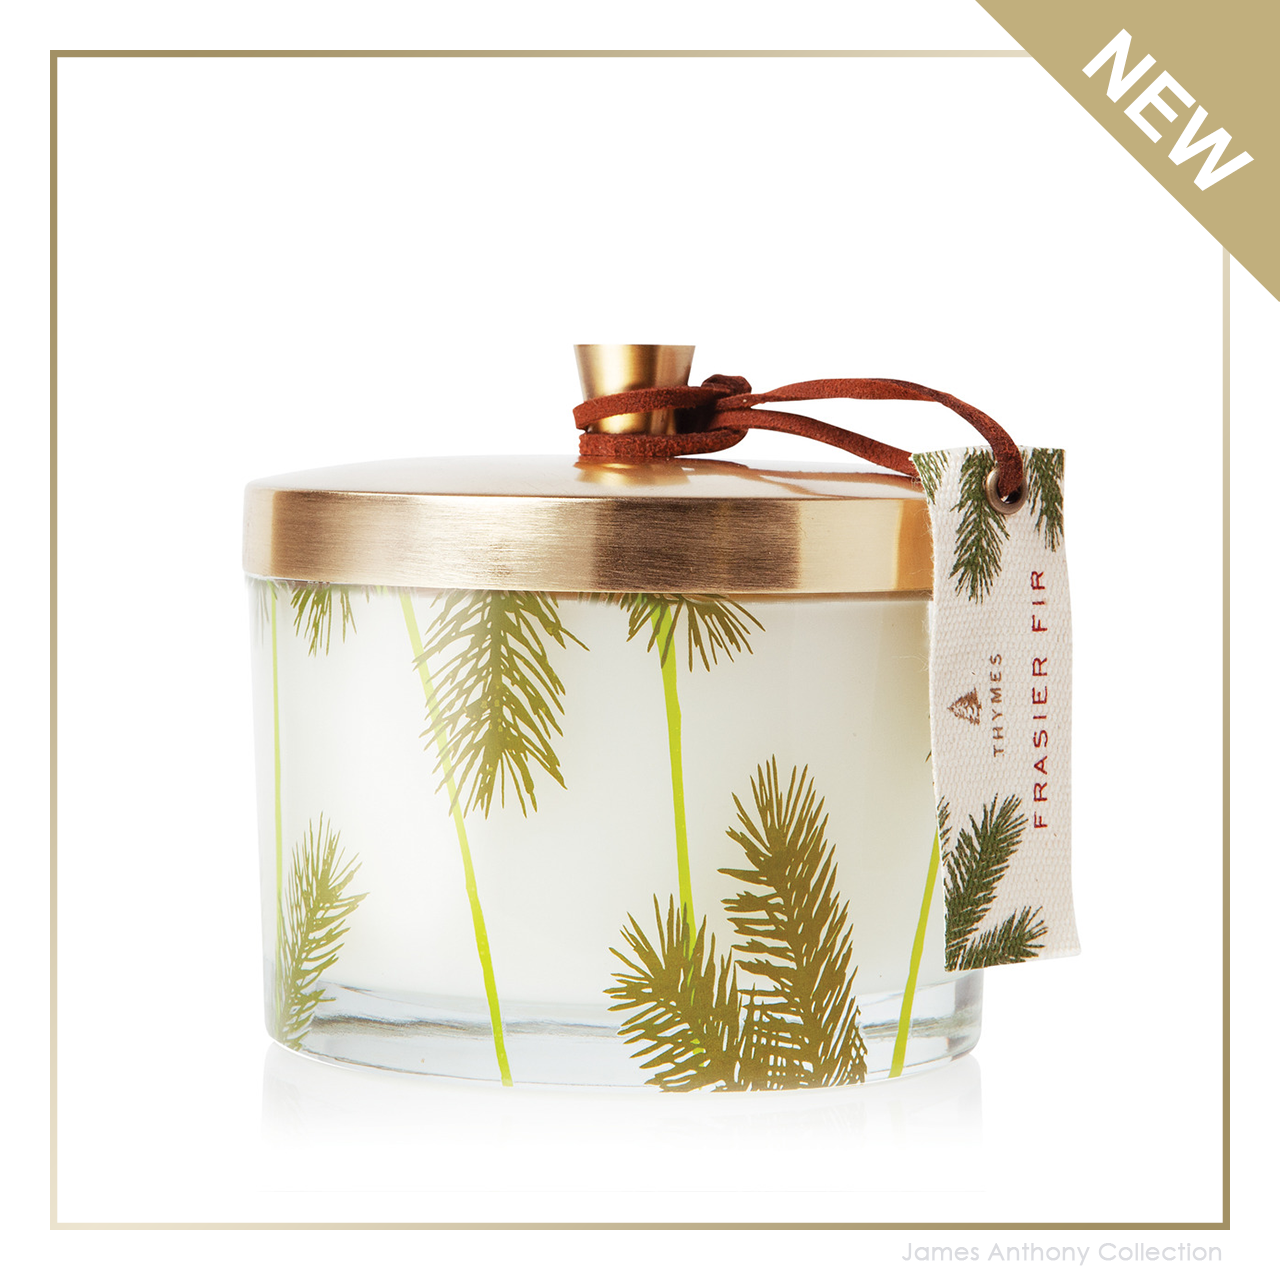 NEW - Thymes Frasier Fir Poured Candle Pine Needle 3-Wick